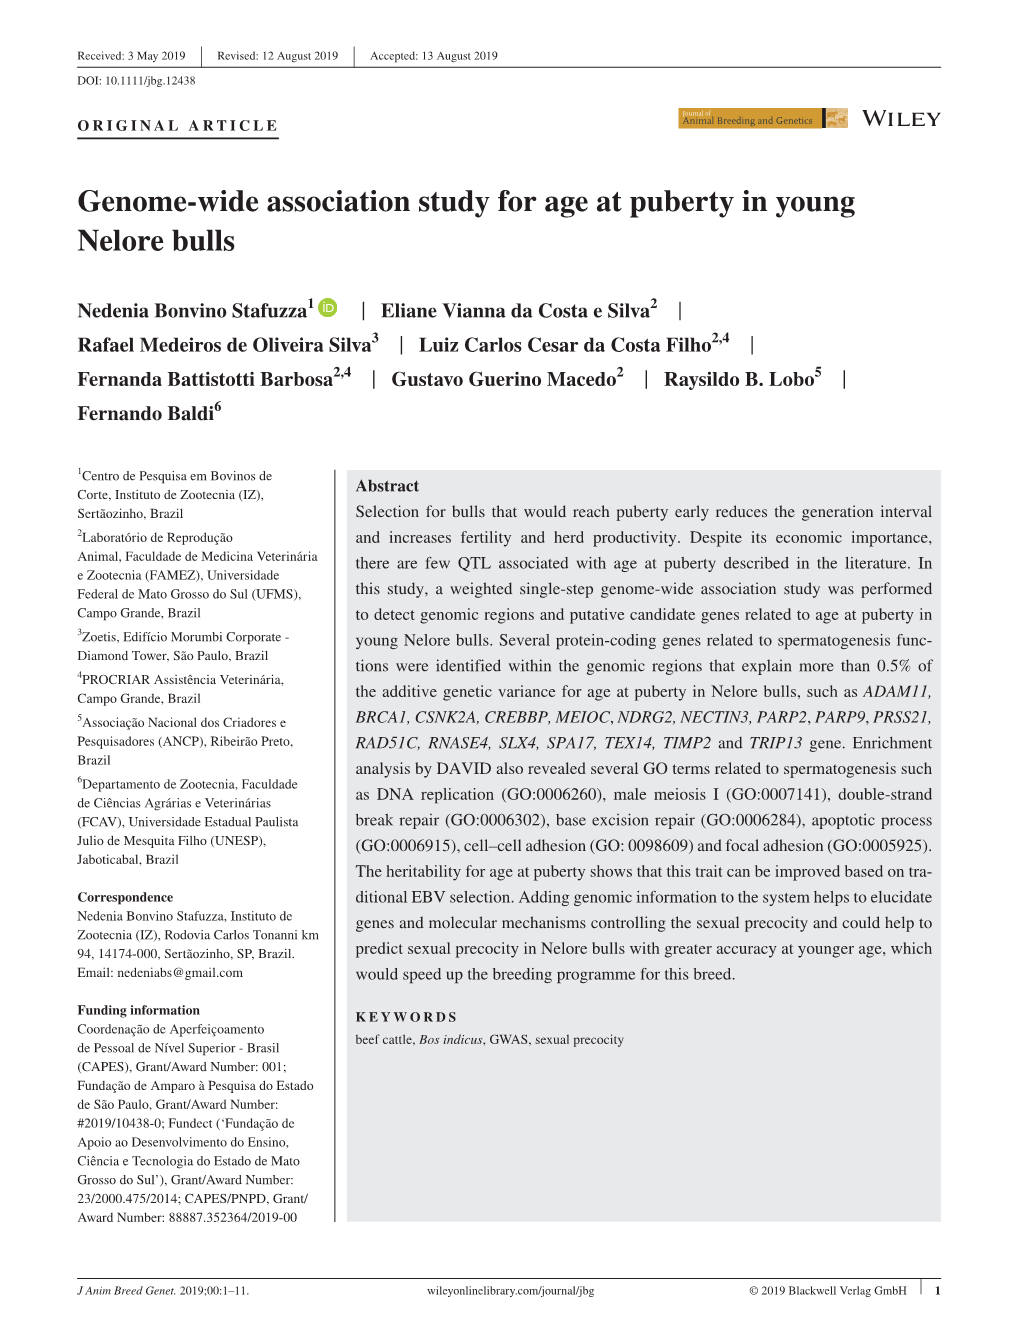 Genome‐Wide Association Study for Age at Puberty in Young Nelore Bulls